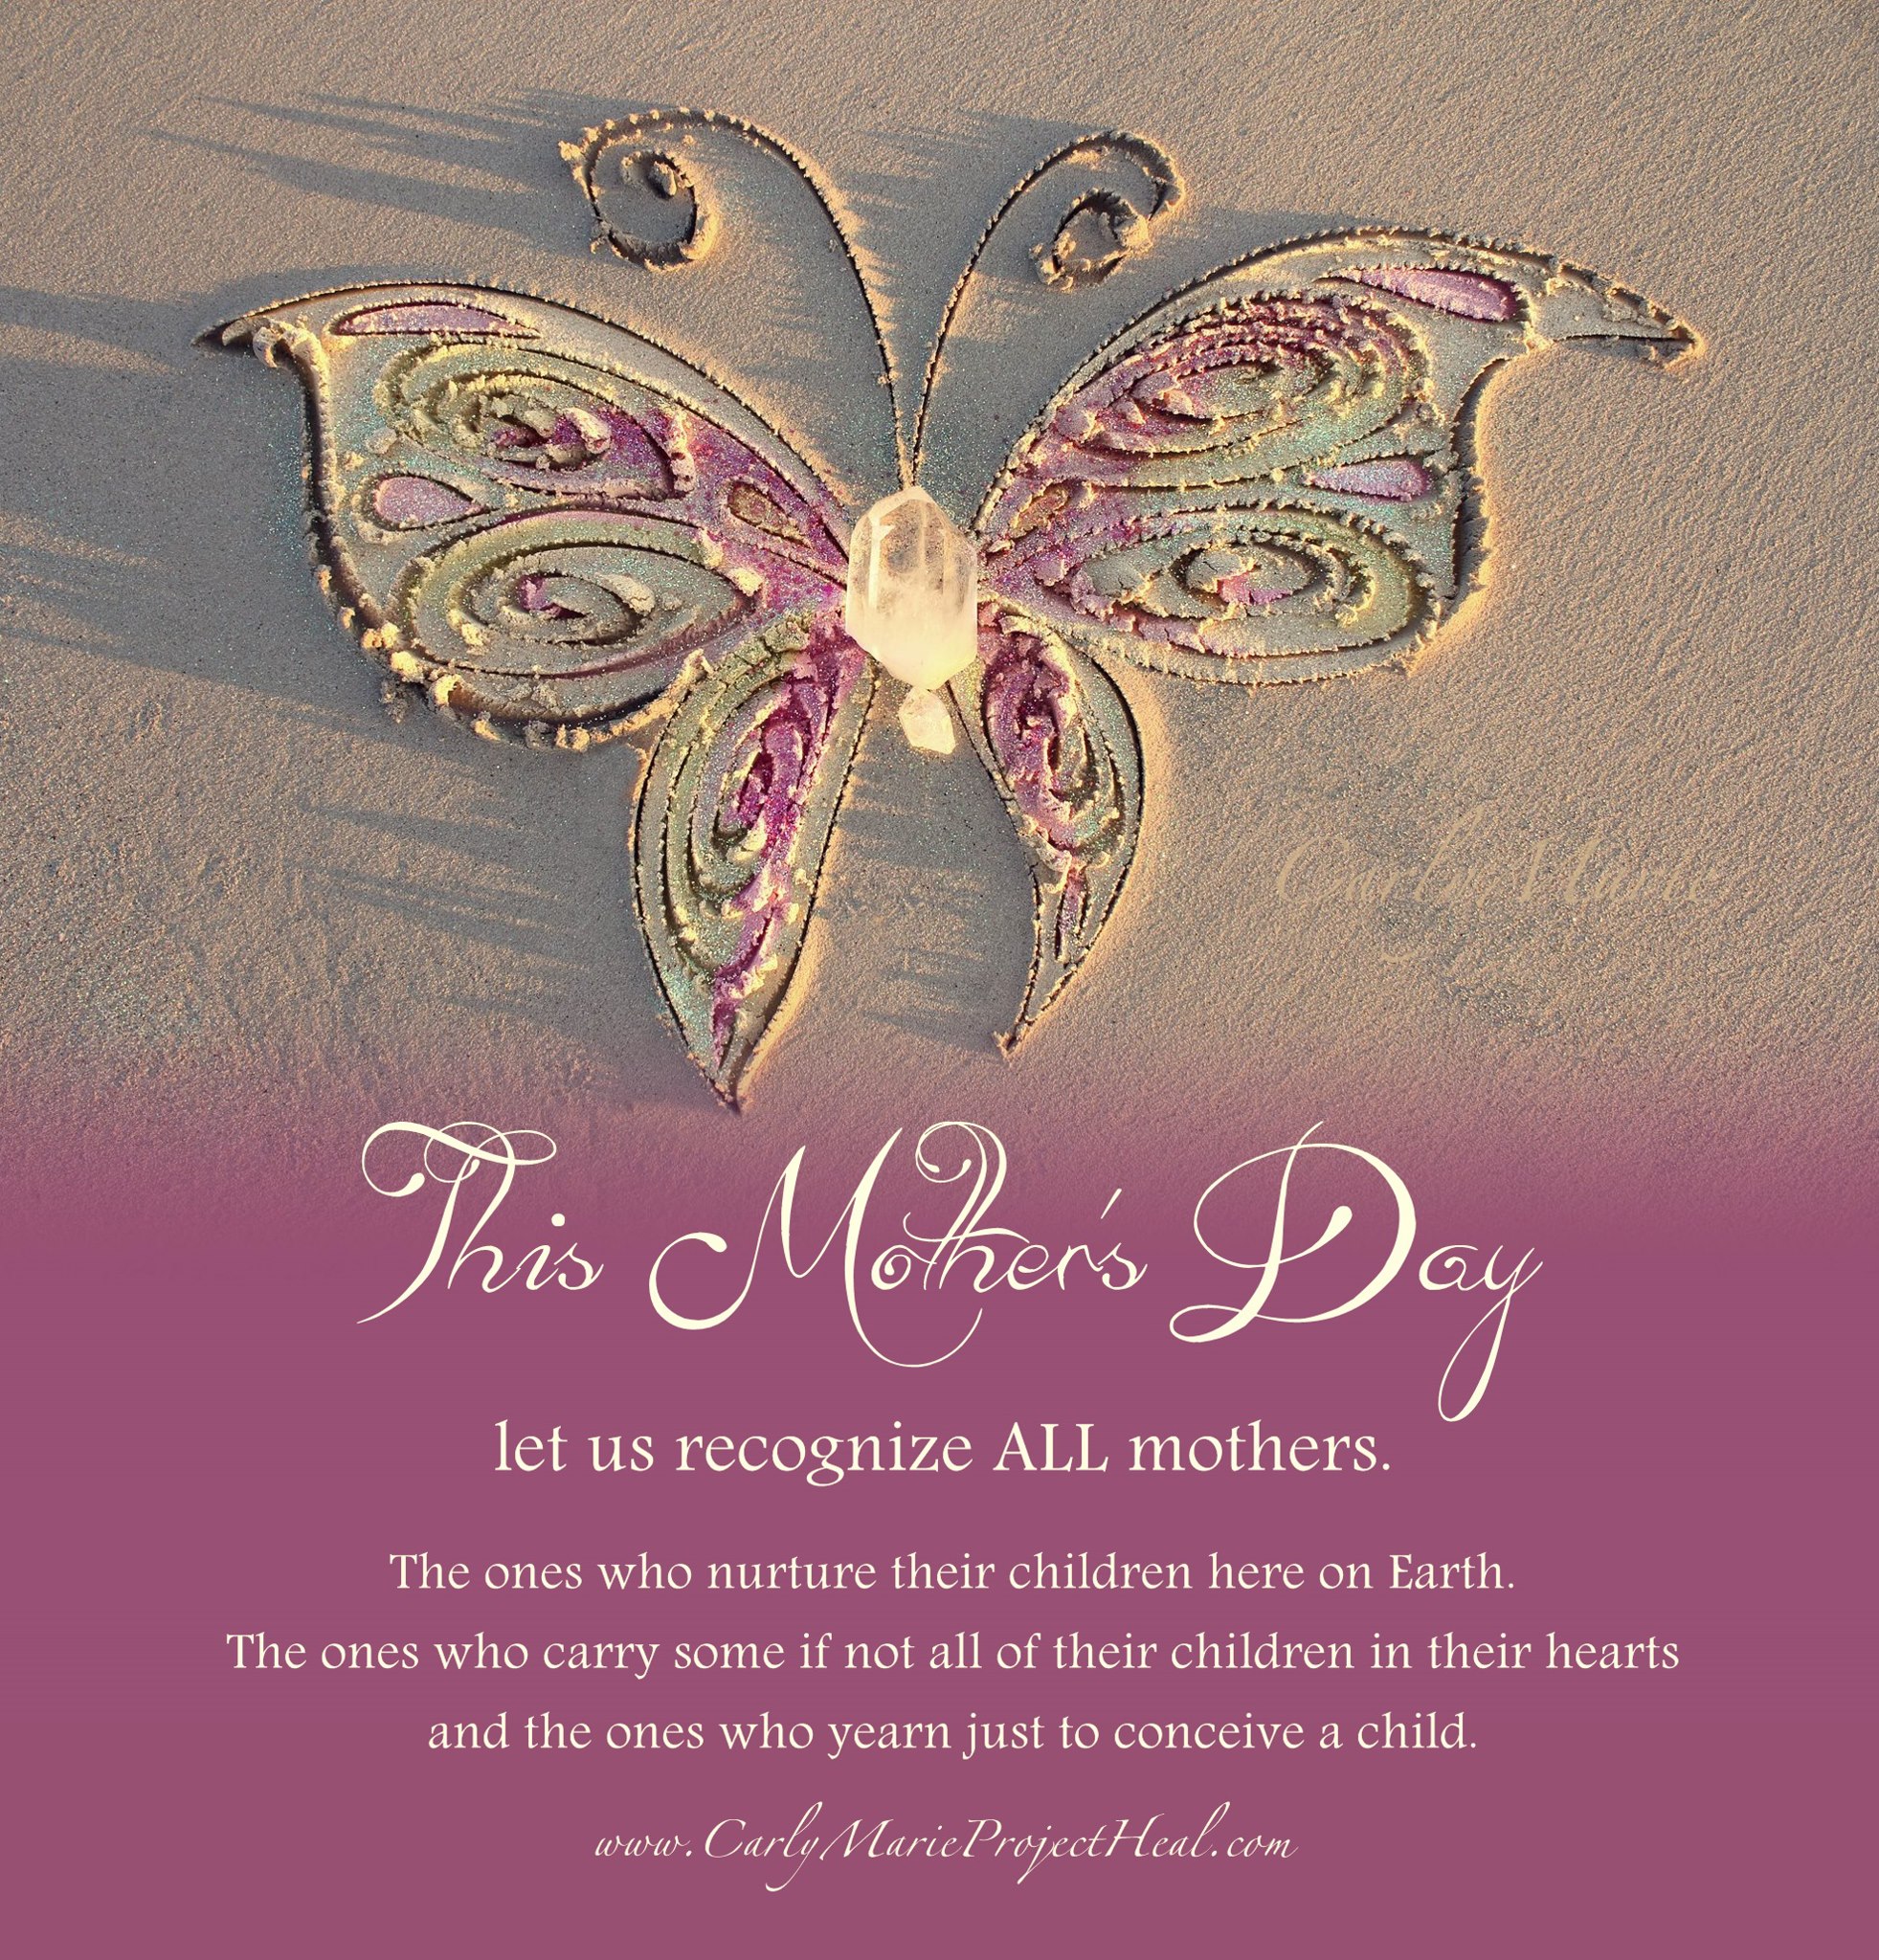 Compatible With Joy Trisomy18 International Bereaved Mothers Day And Me